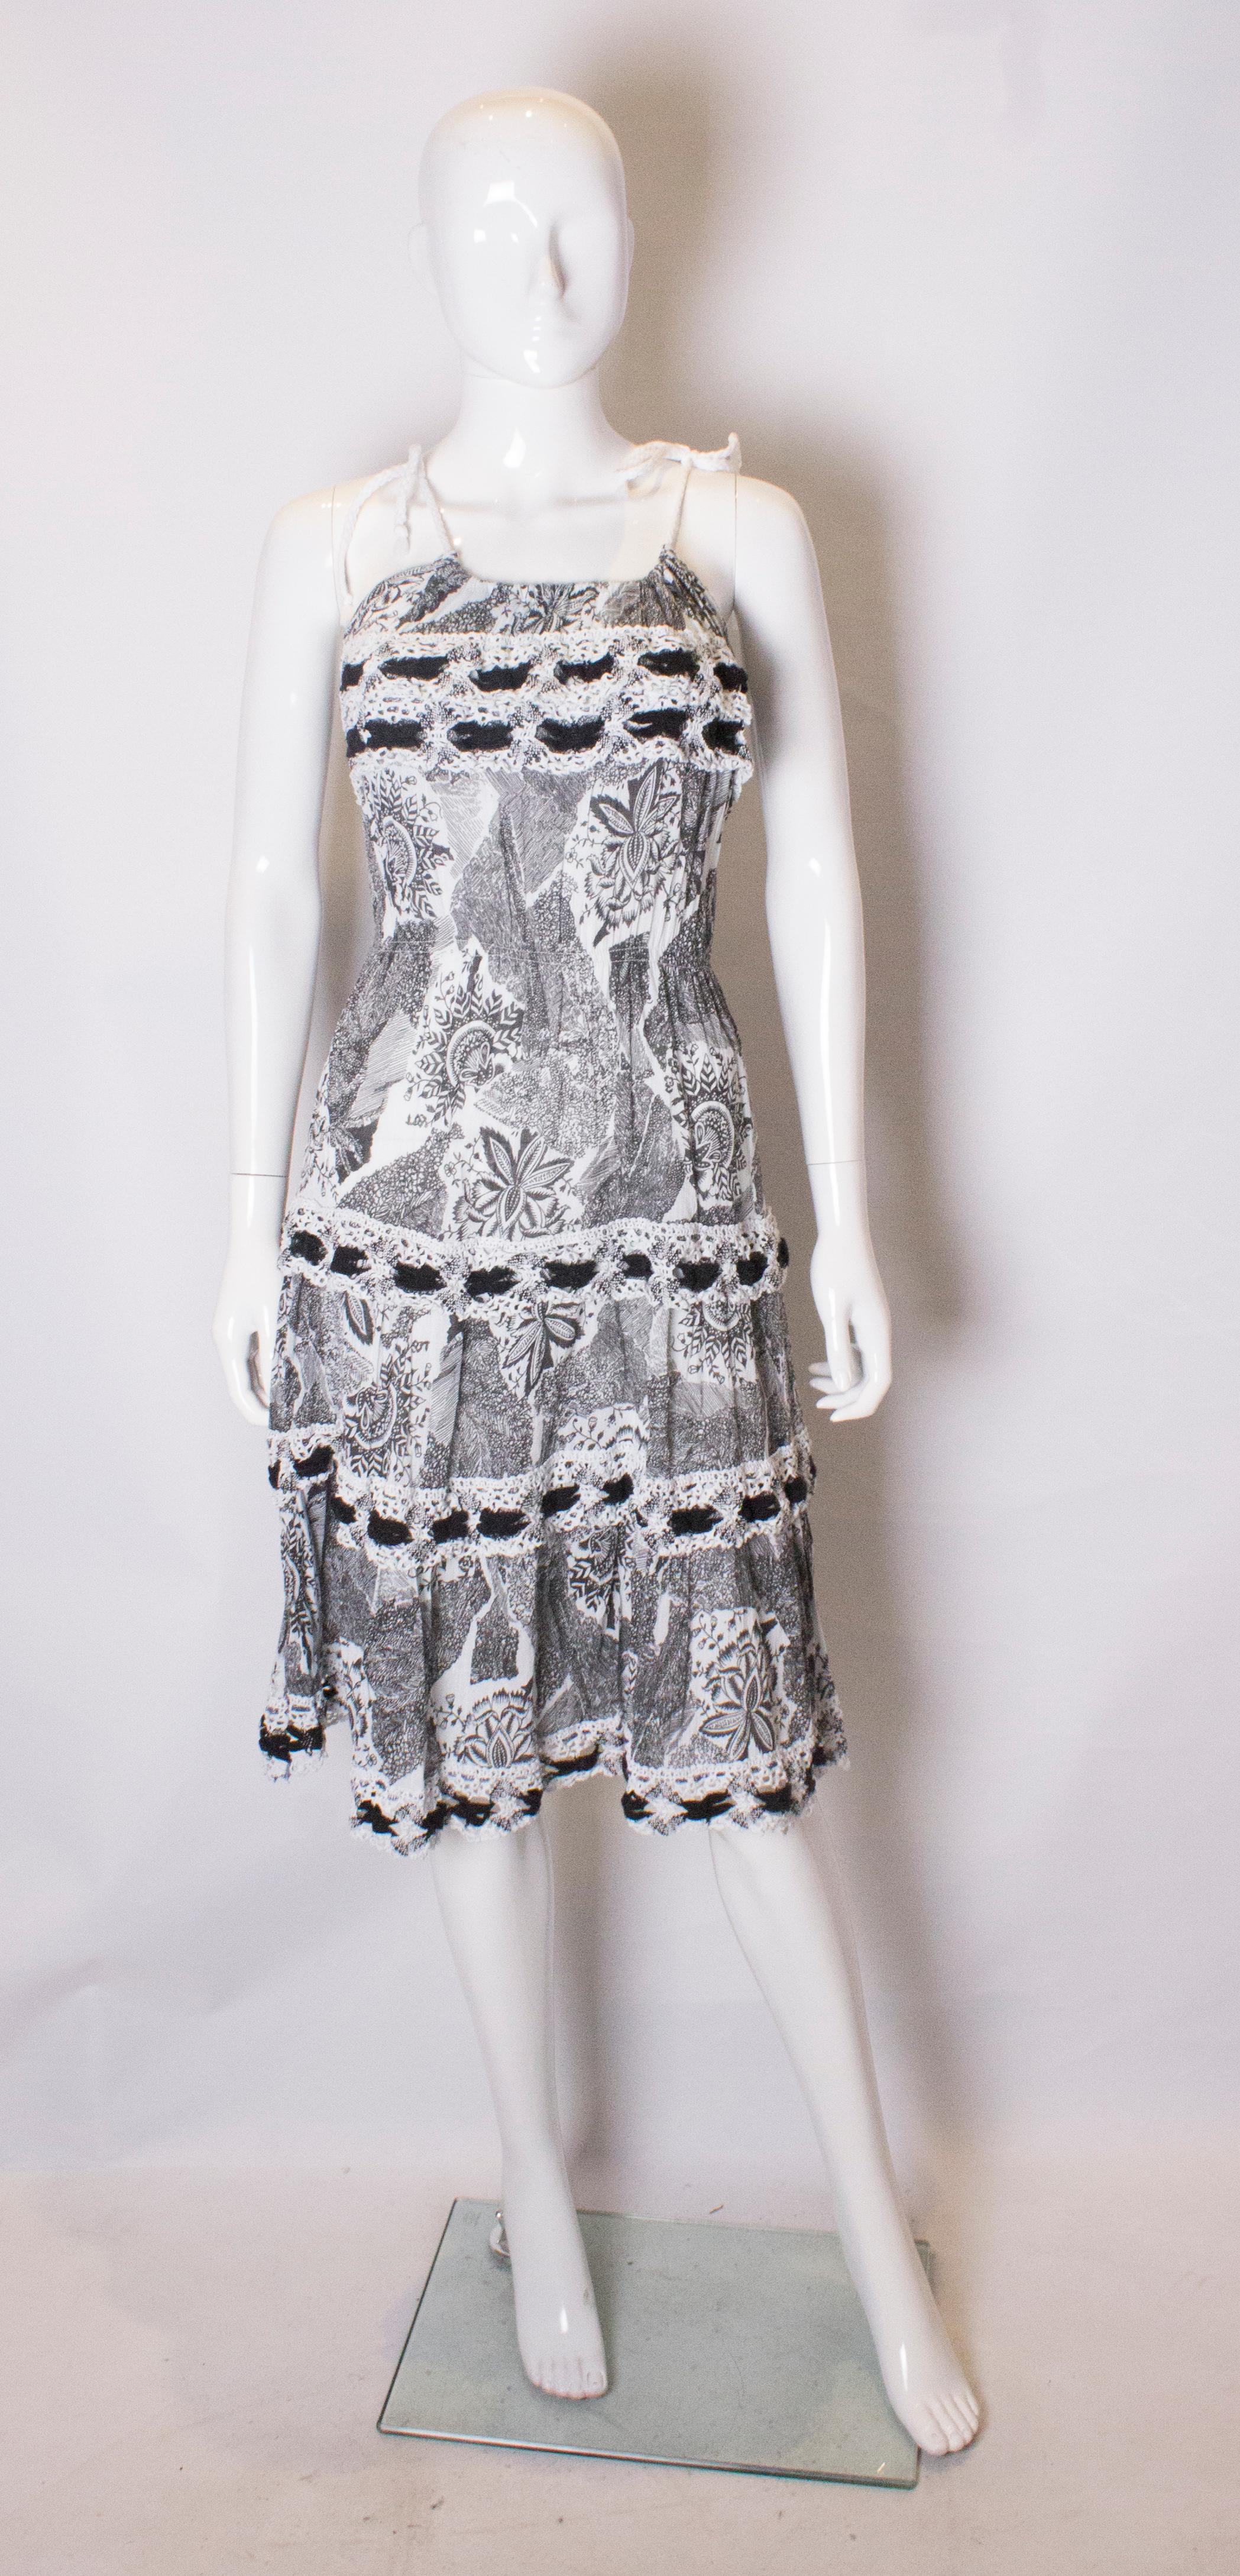 A fun summer sun dress. The dress is in an attractive abstract black and white print. It has white  cord shoulder ties, with an elastic waist ( best 24 -27'') and crochet detail trim.